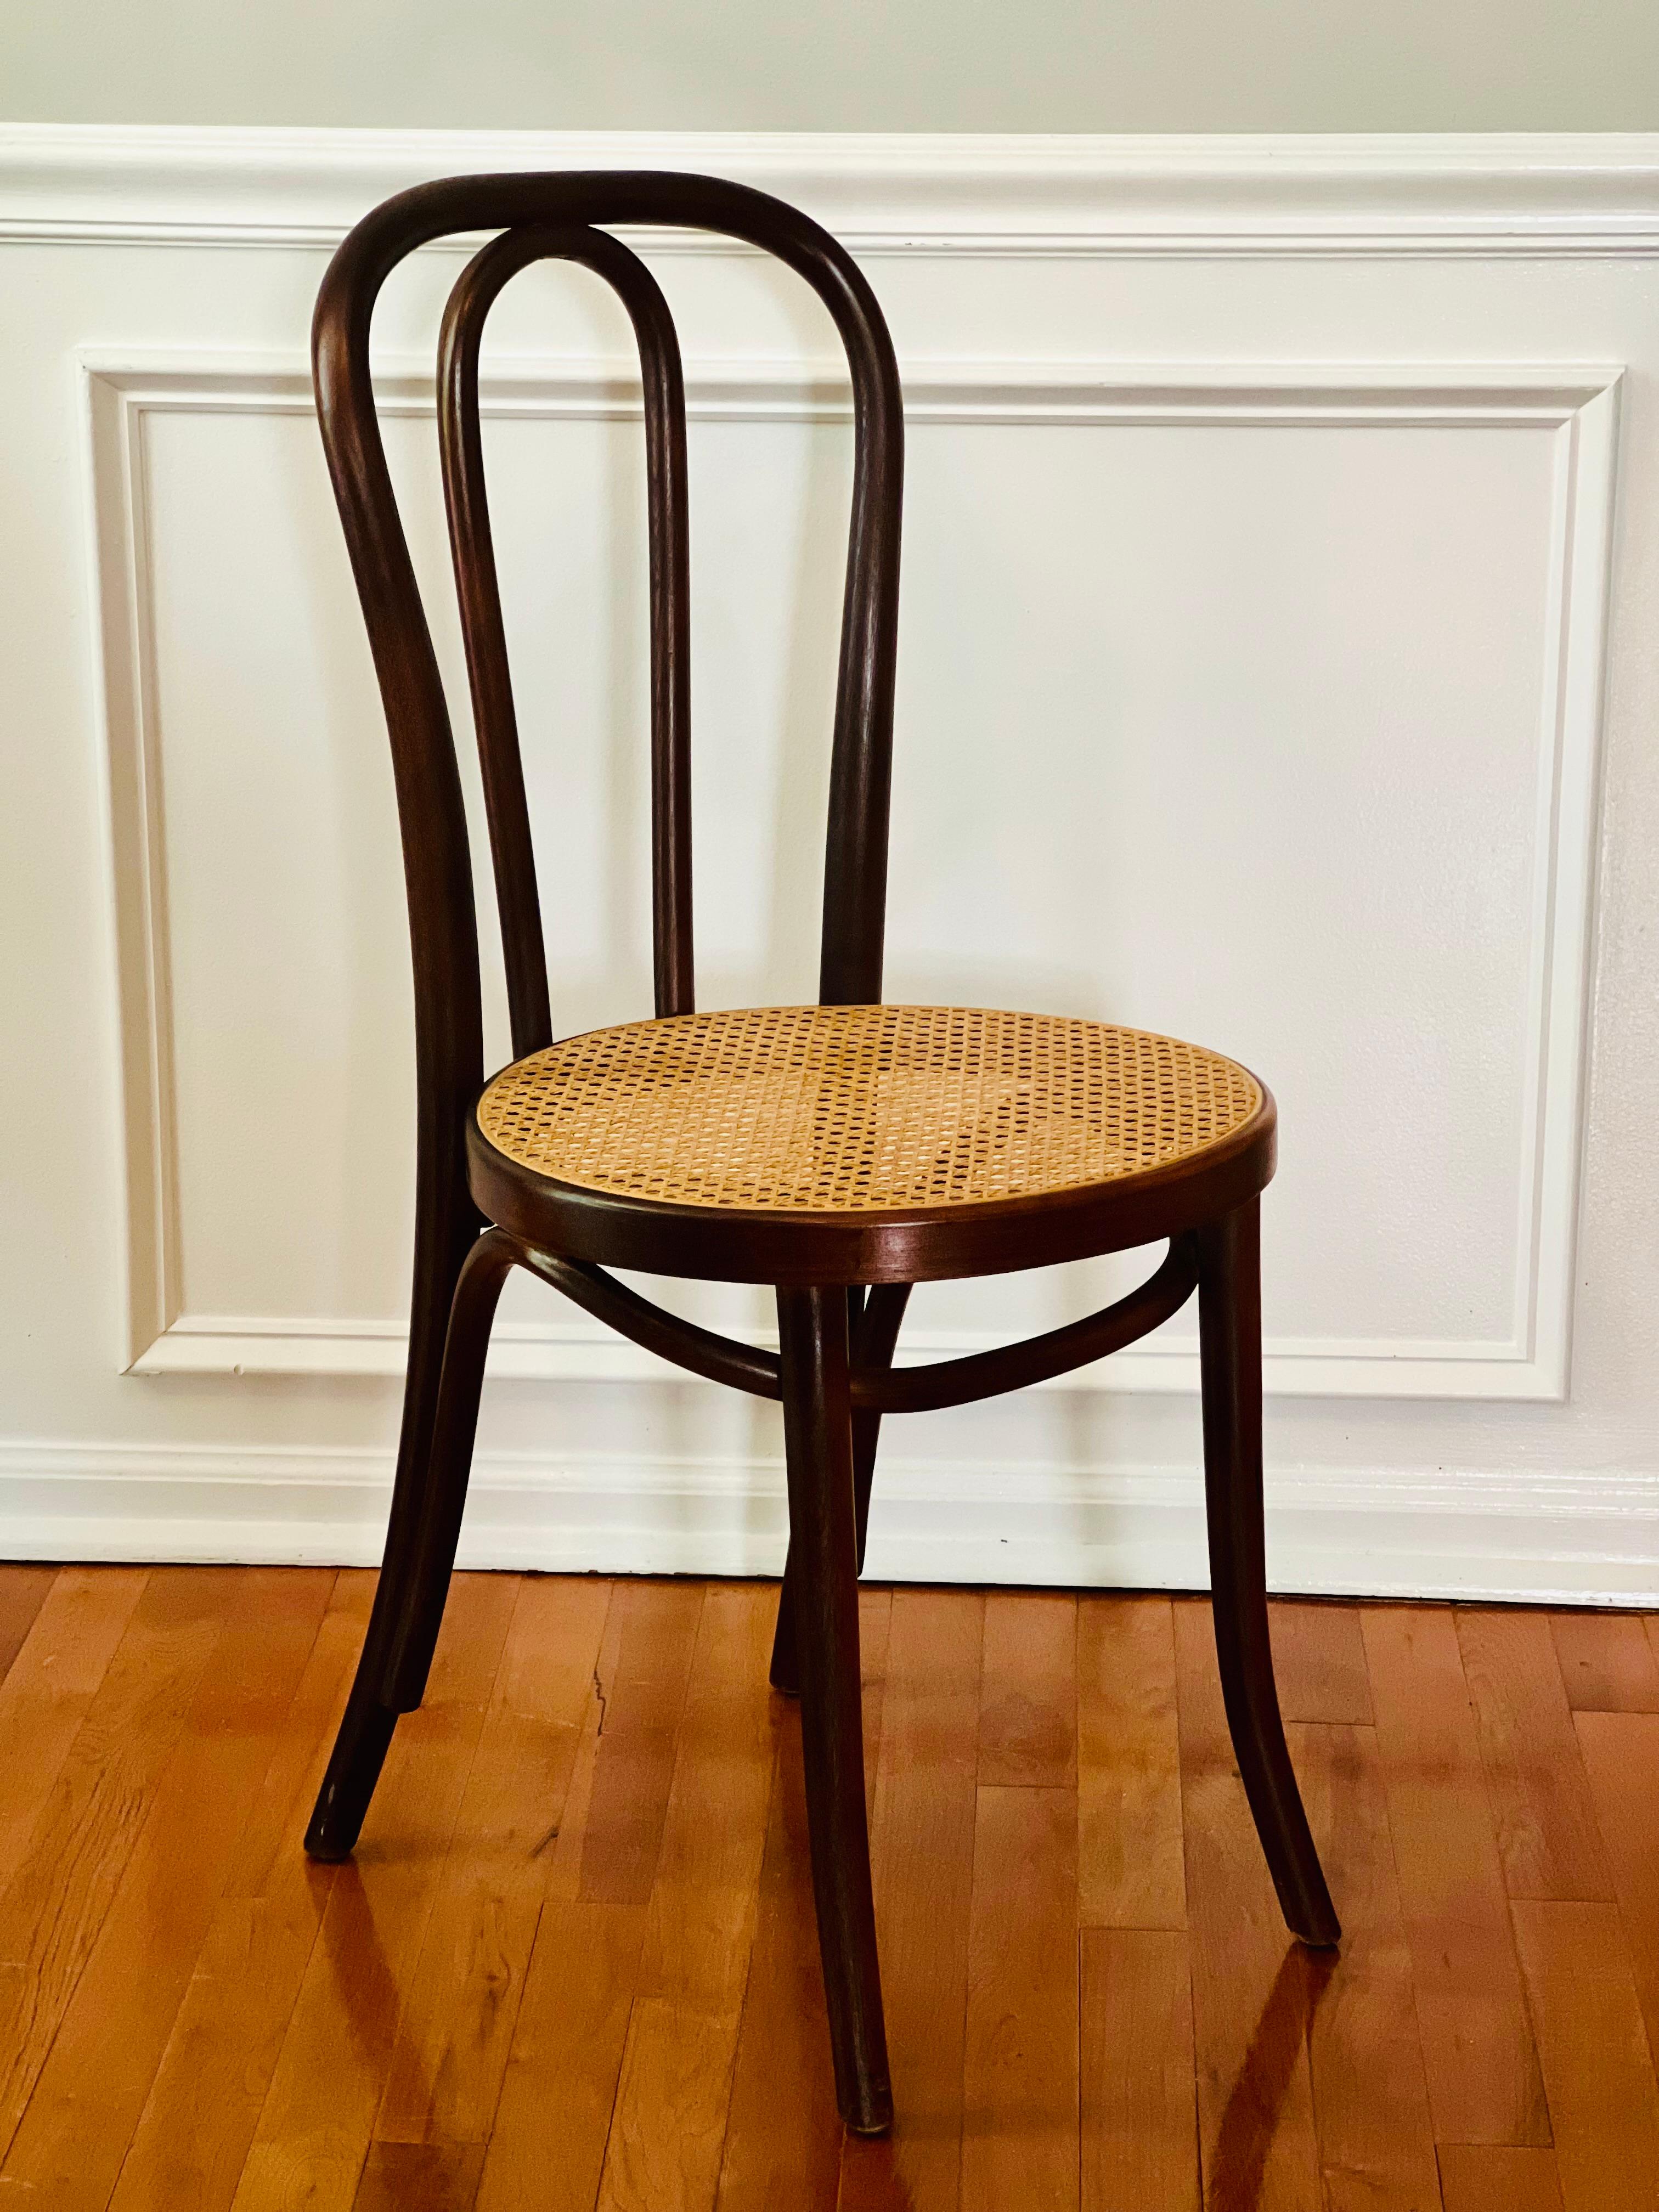 Thonet Bentwood Cane Bistro or Side Chair, 1920's For Sale 9